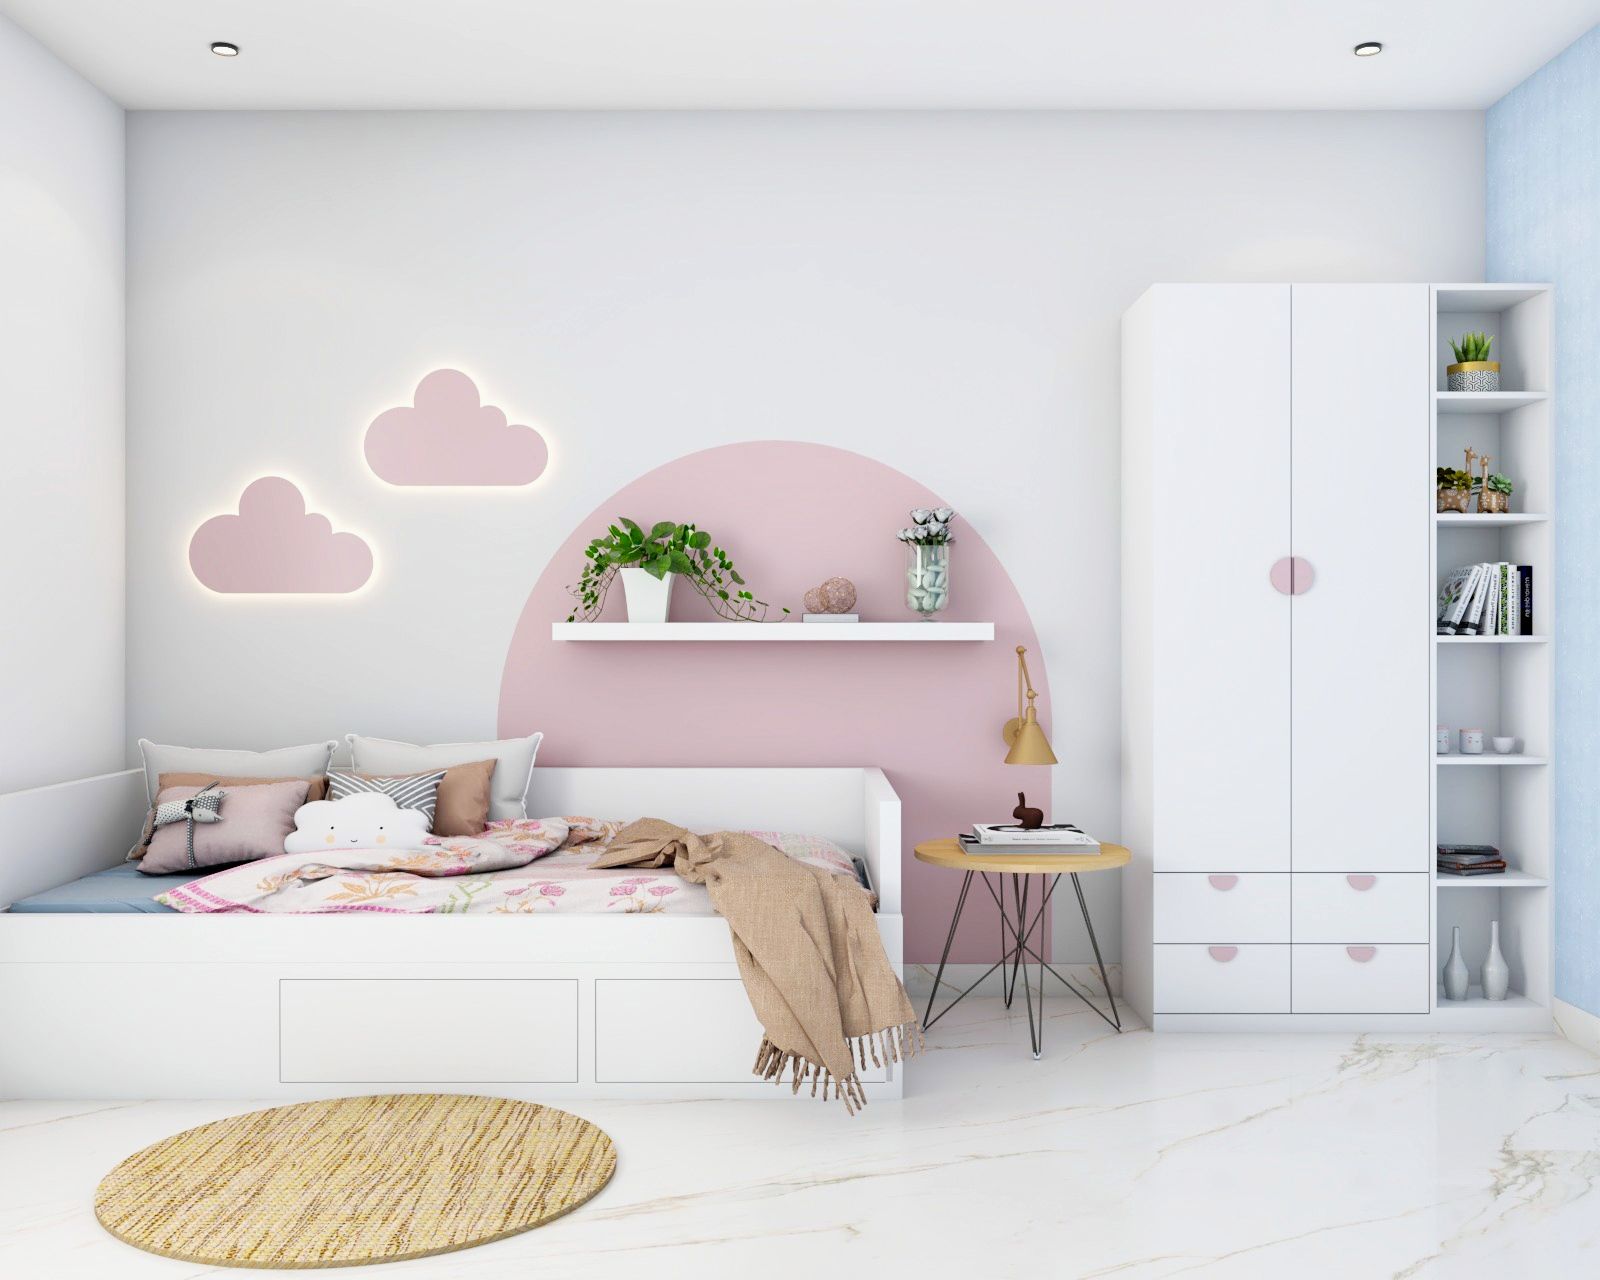 Minimal Pink And White Kids Room Design With Cloud Decor And Backlights